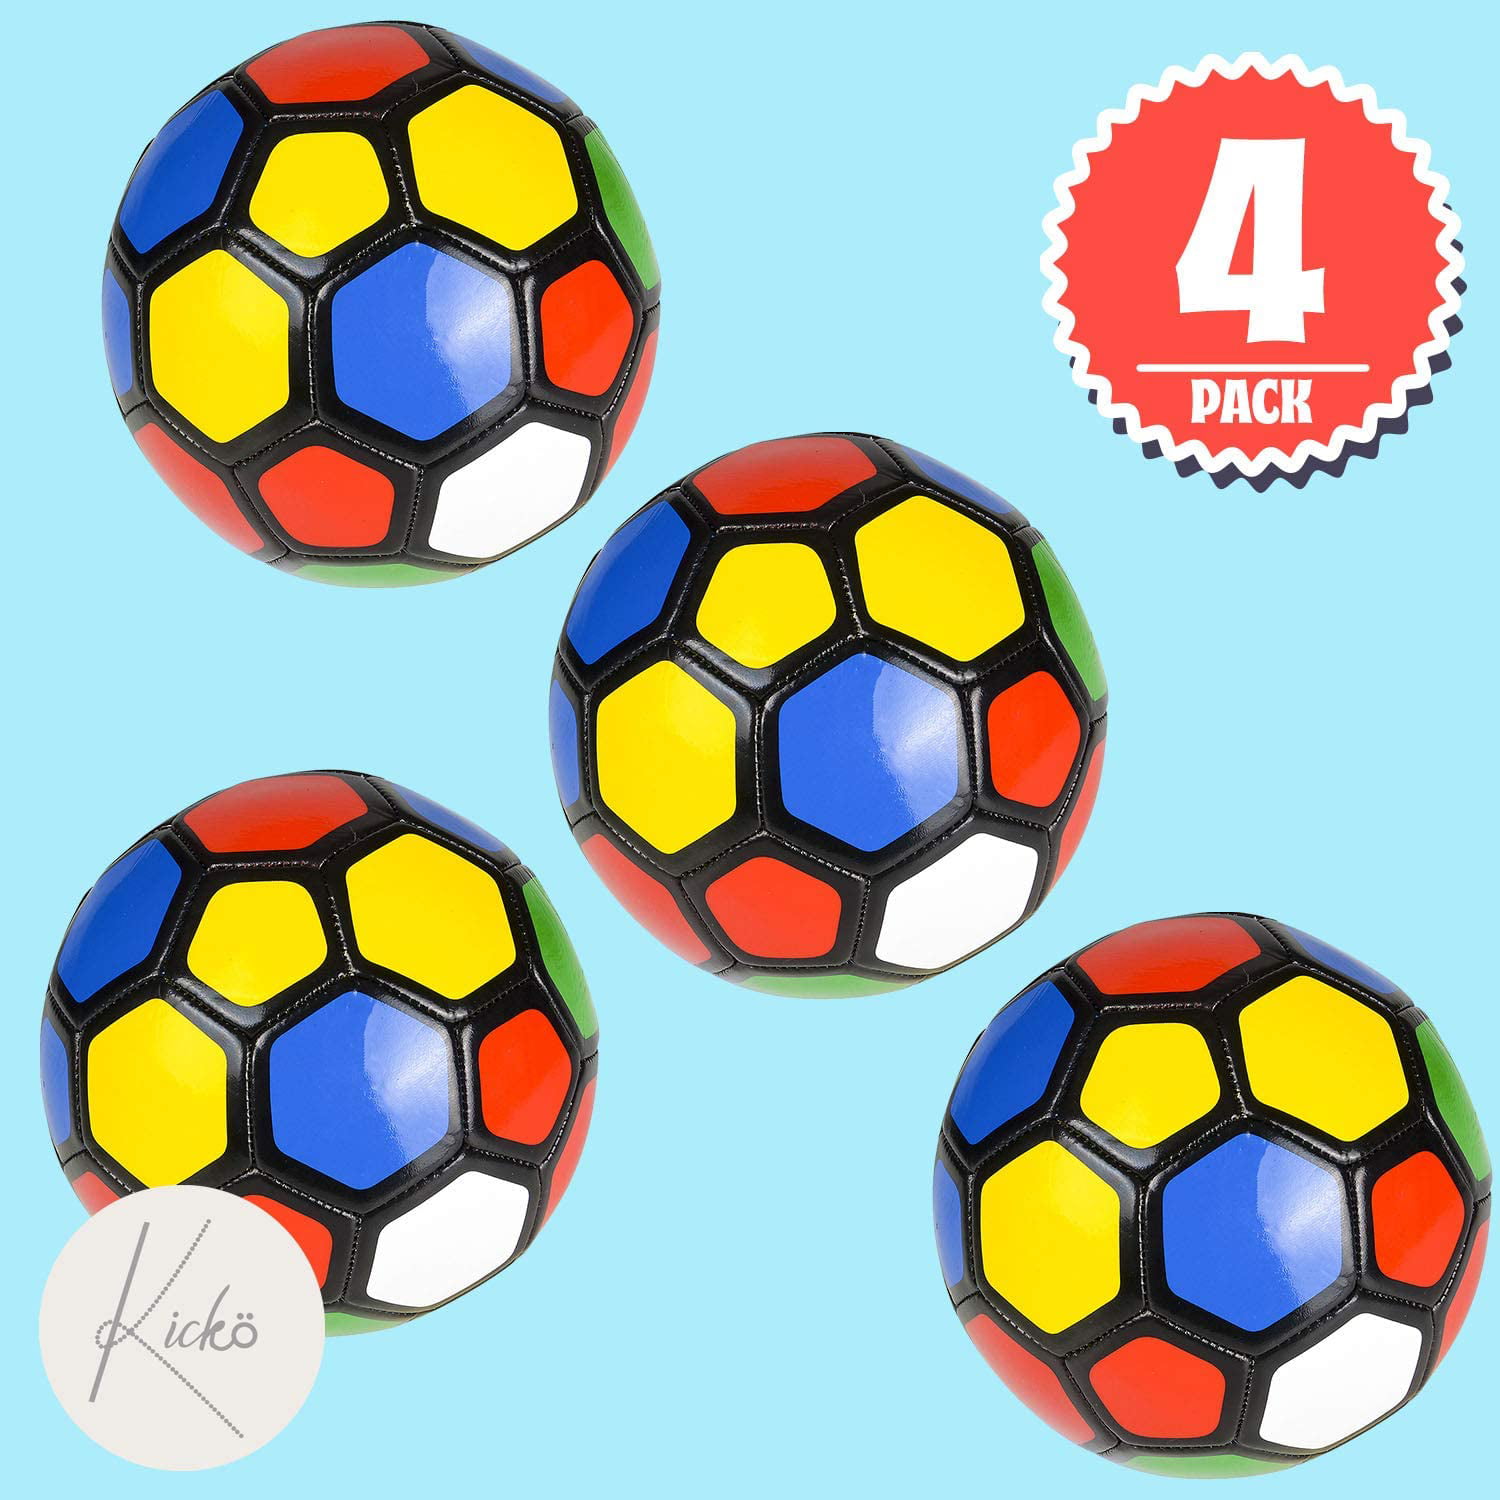 Pack of 4 5” Mini Sports Ball Multicolor Soccer Ball Perfect for Outdoor... 